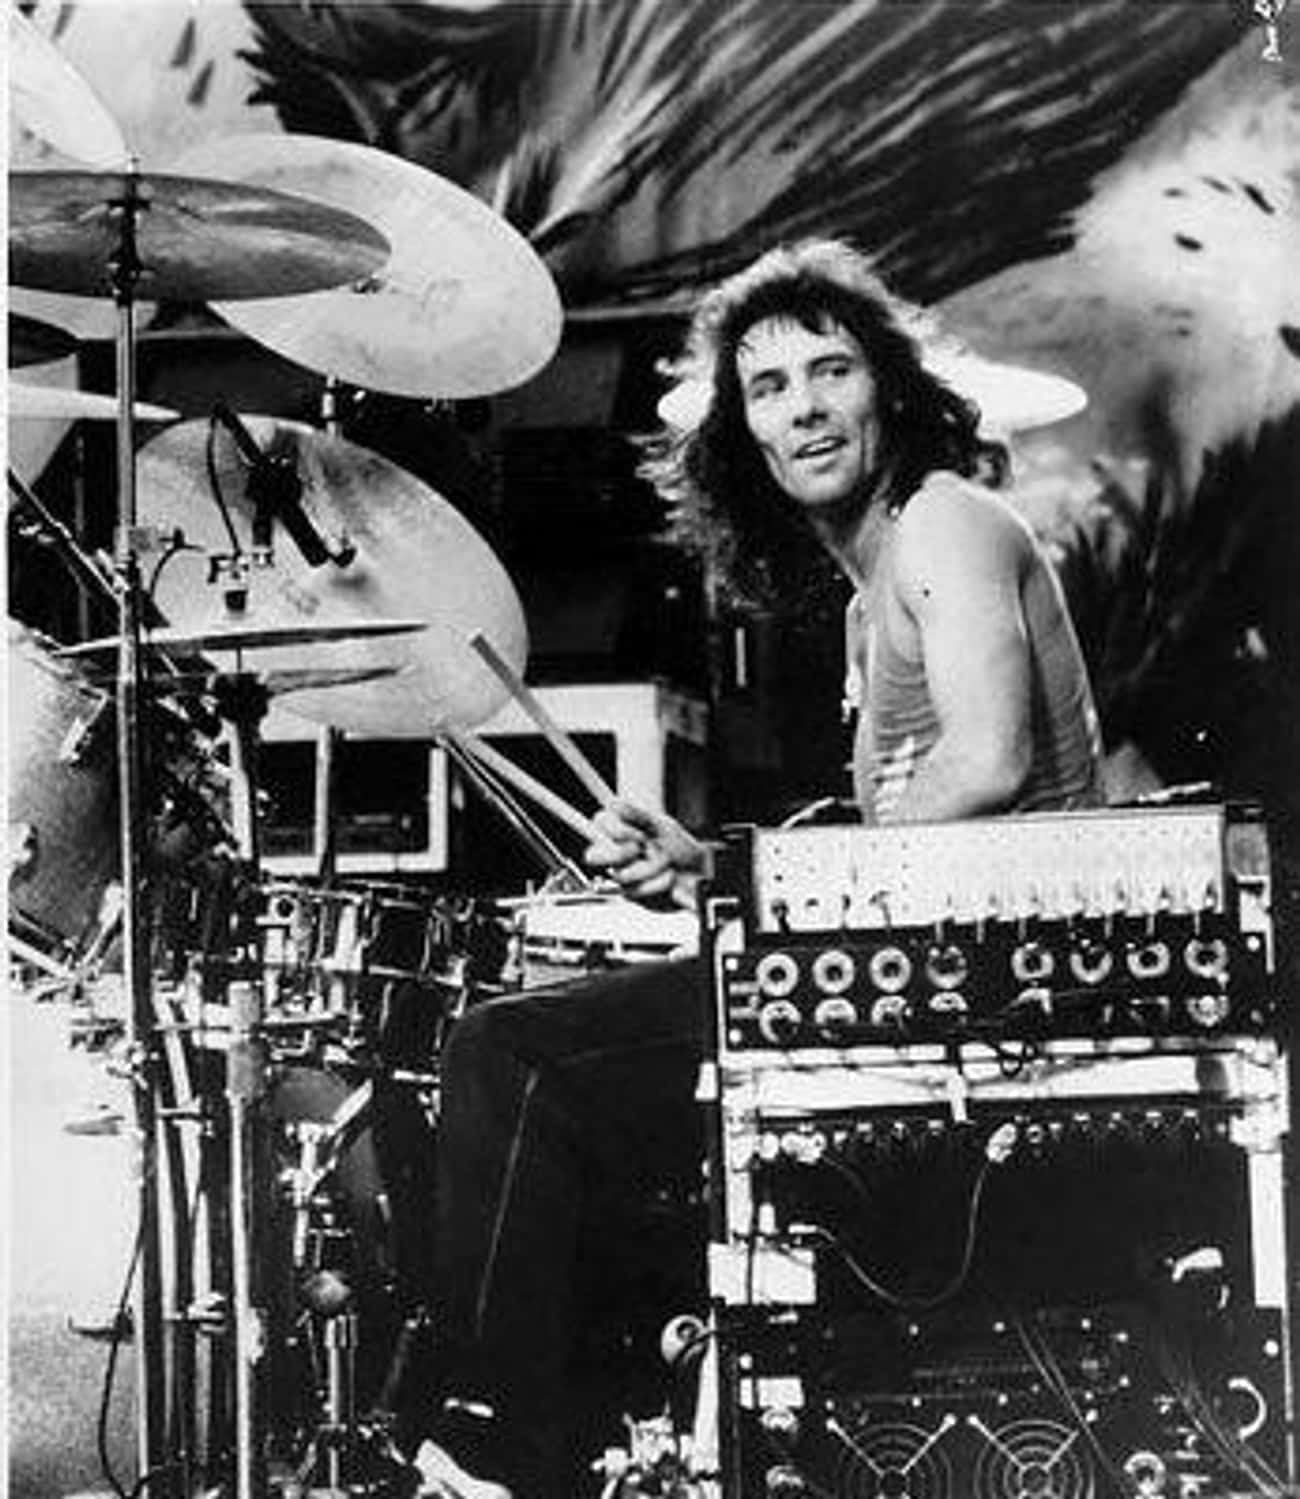 Drummer Aynsley Dunbar Took Some Time To Get "Big And Beefy Enough" To Cast